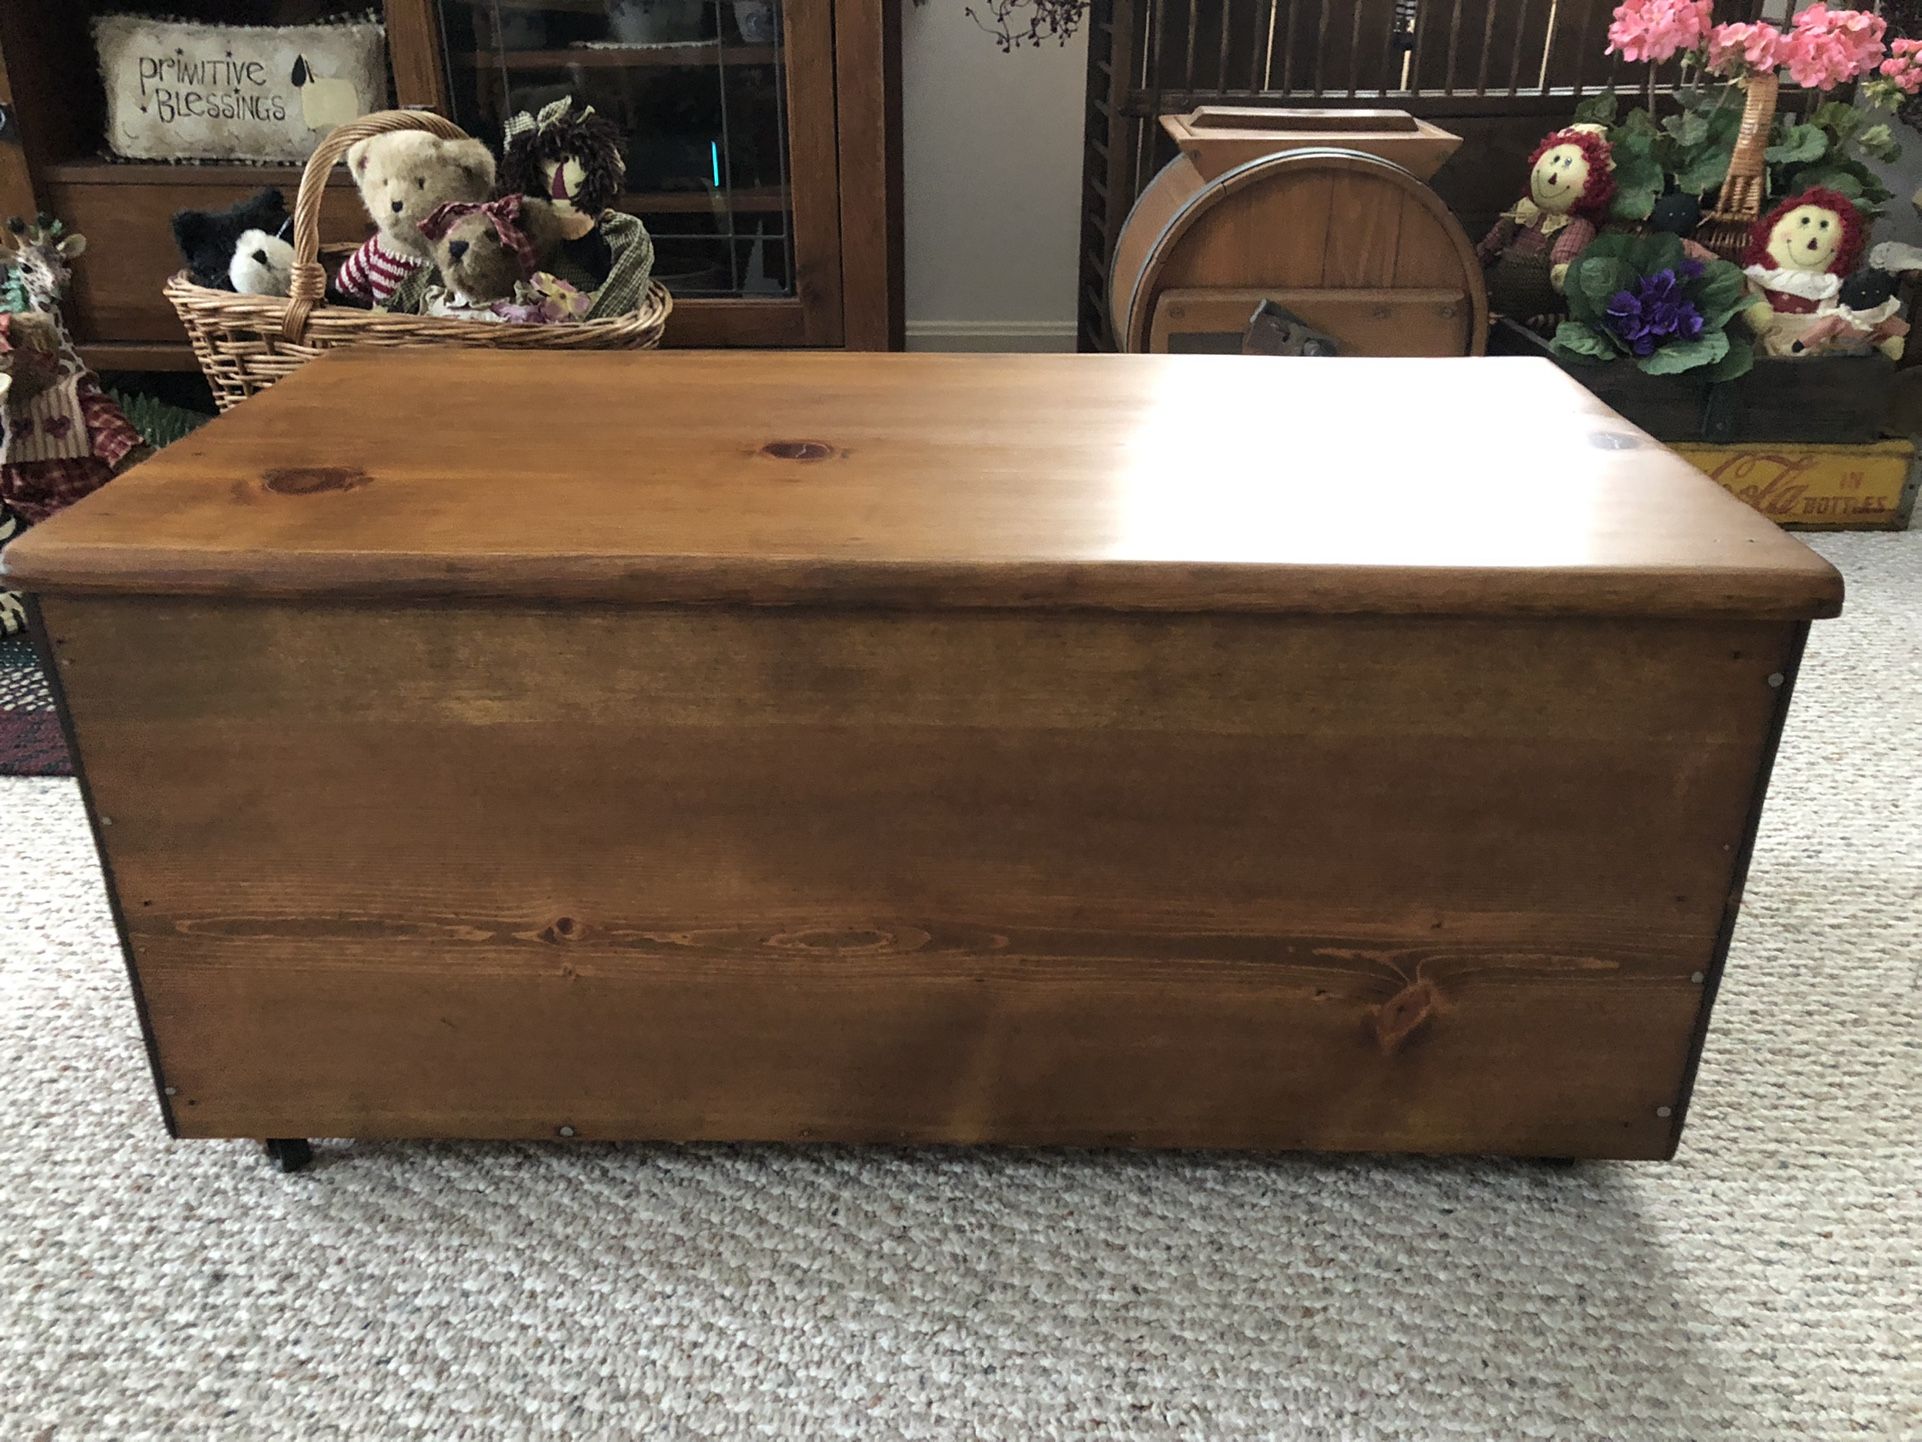 Antique toy or blanket chest